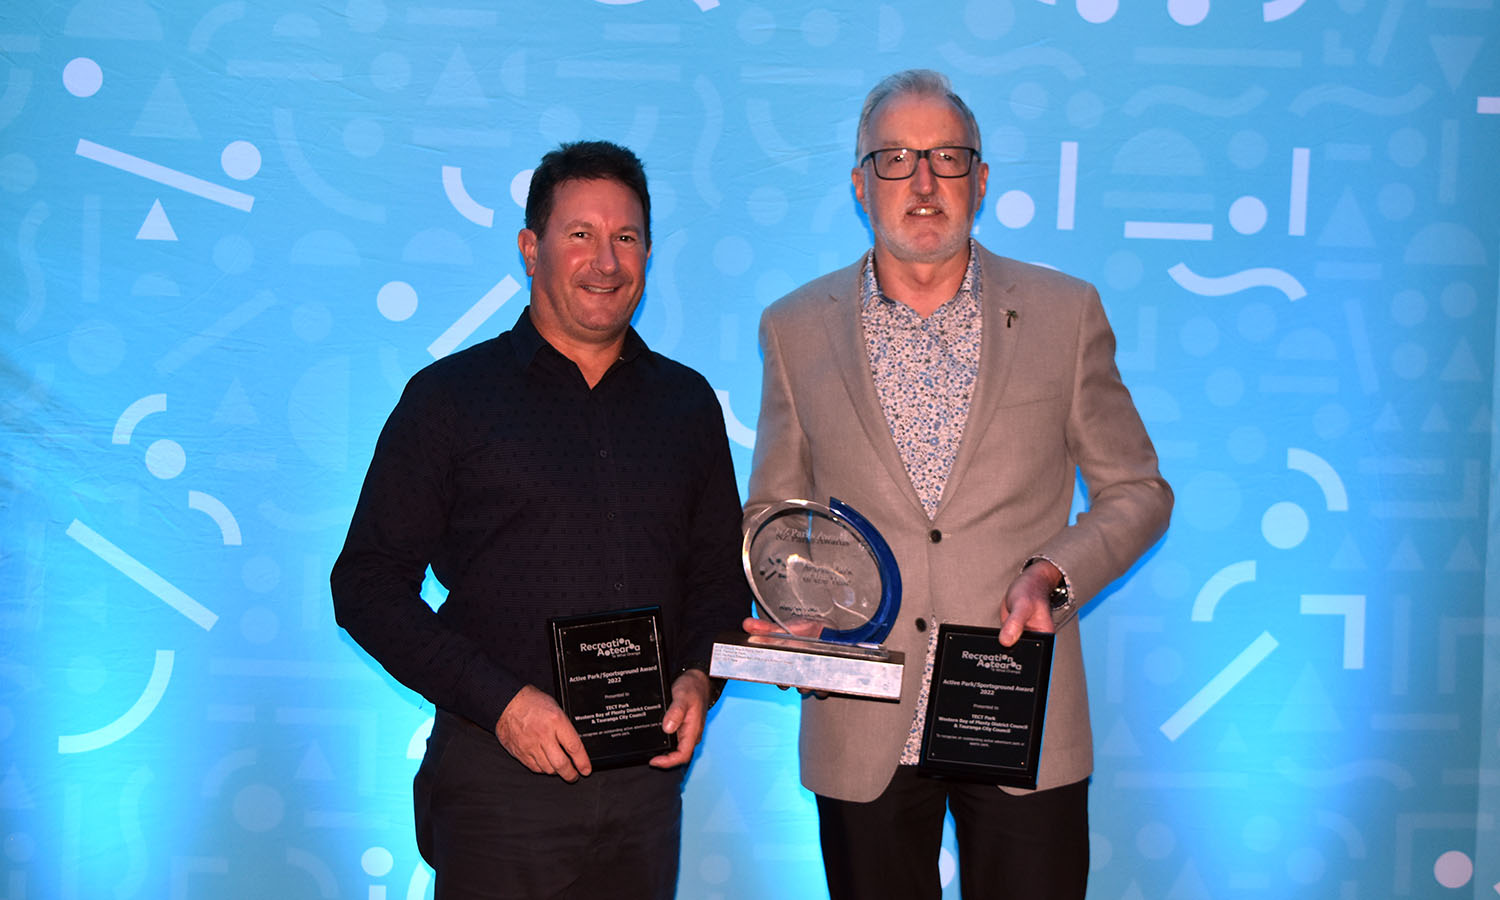 Warren Aitken of Tauranga City Council, and Scott Parker from Western Bay of Plenty District Council accepted the award on behalf of TECT Park.